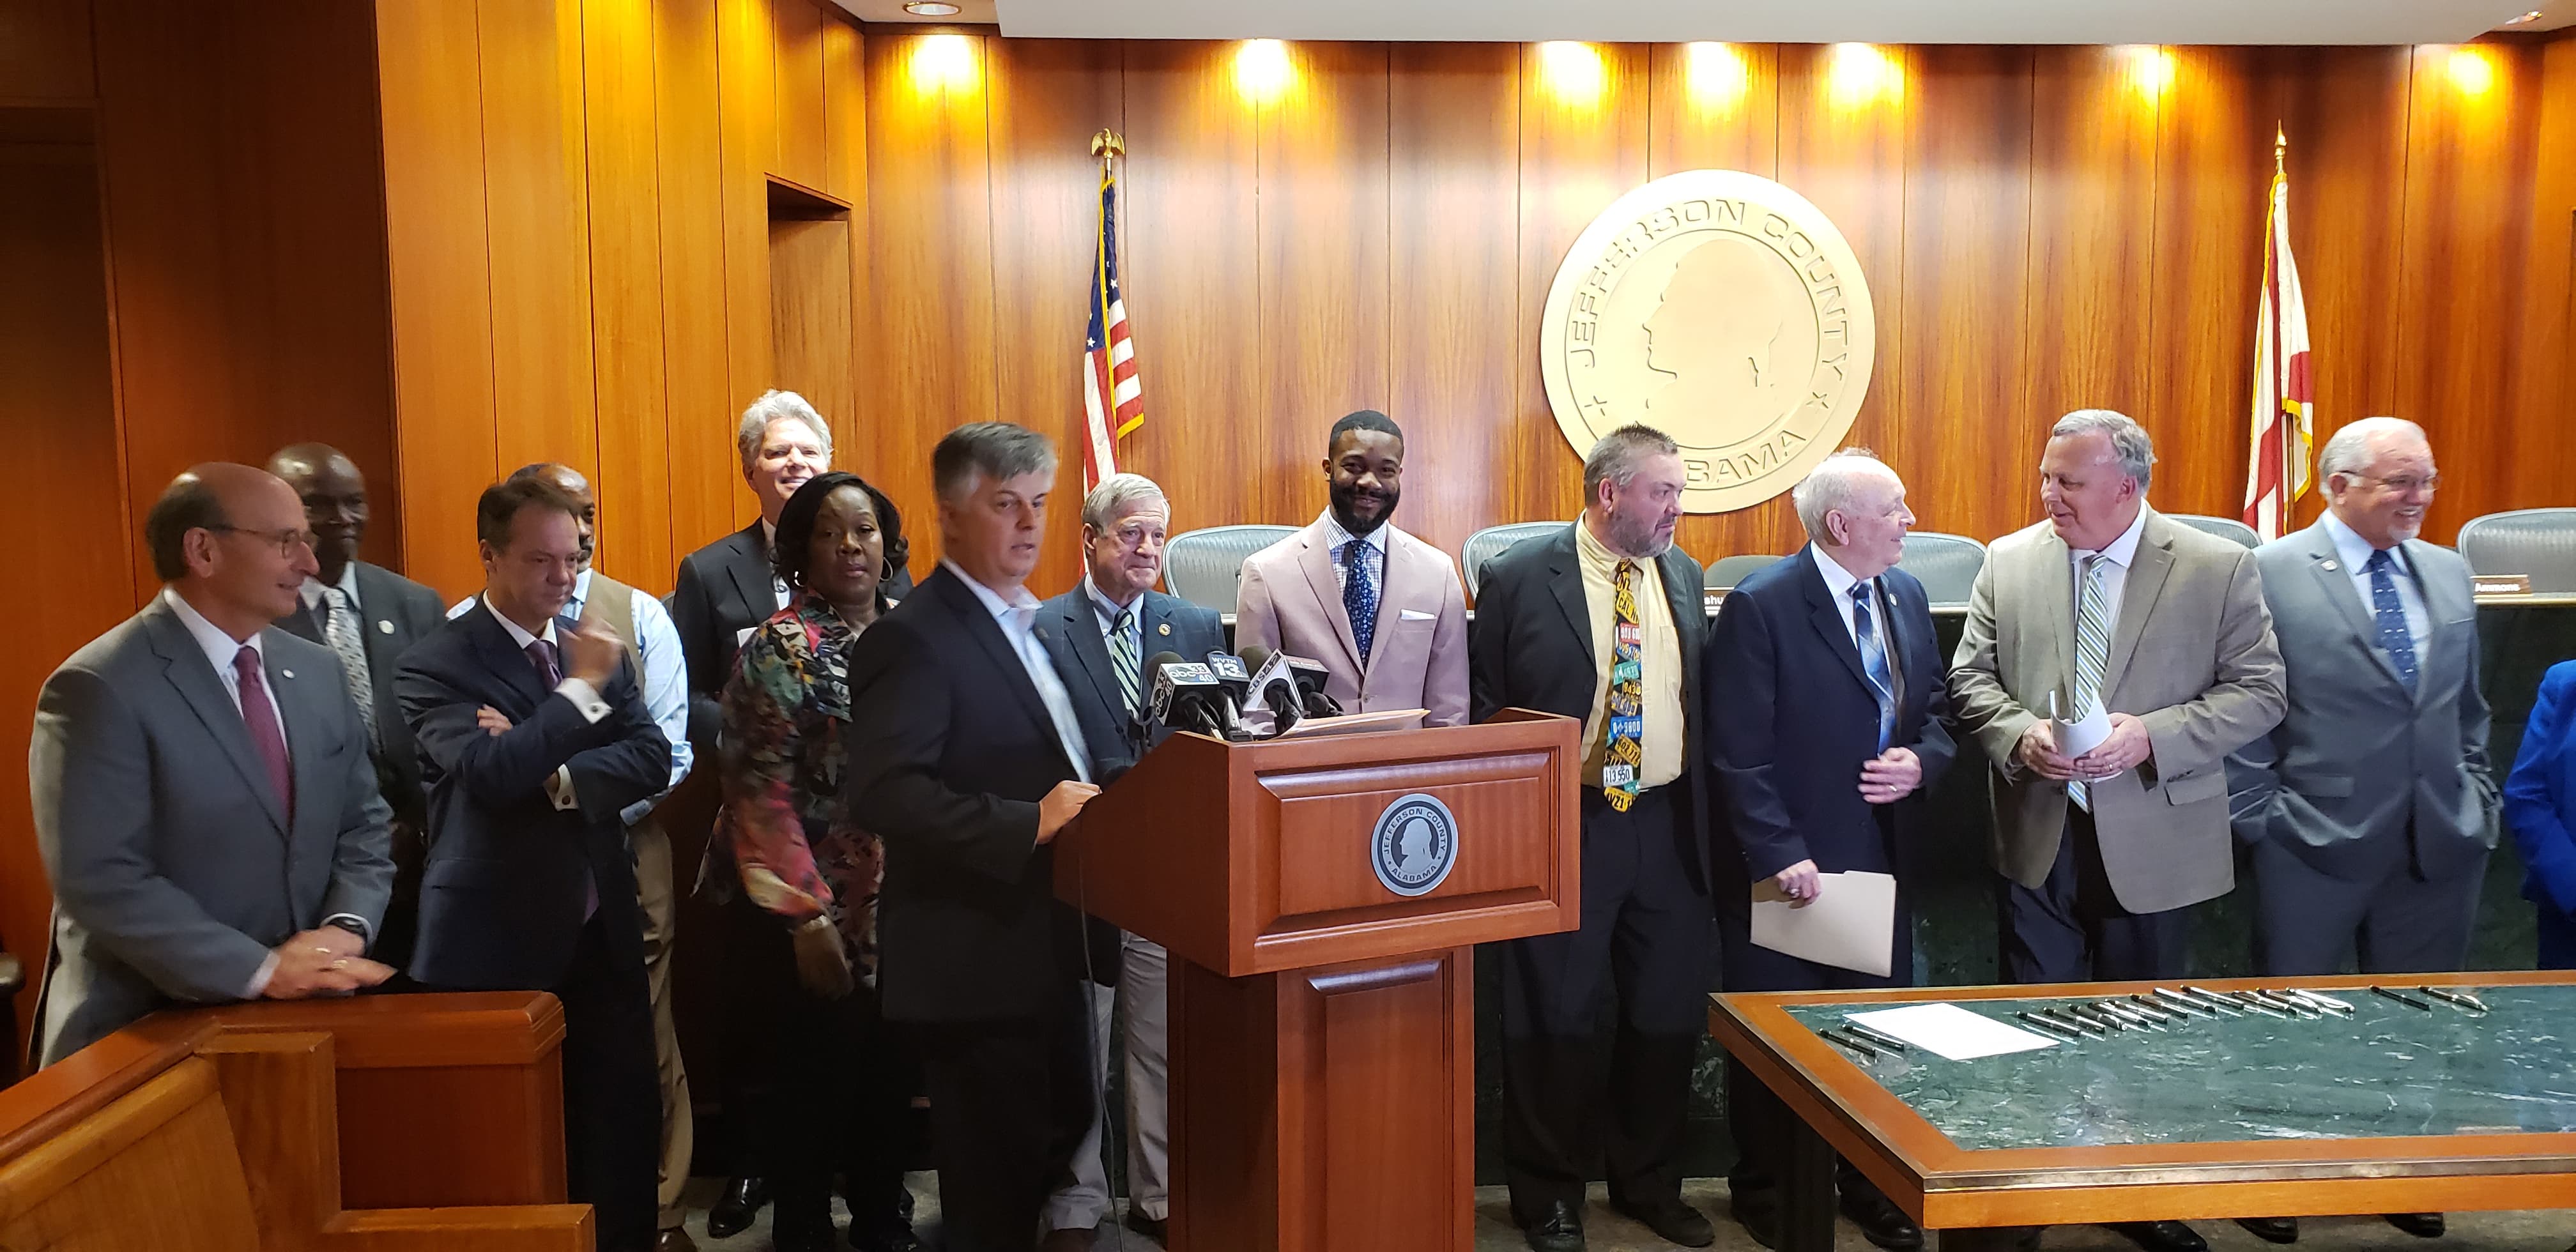 Mayors of 22 cities come together to sign ‘Good Neighbor Pledge’